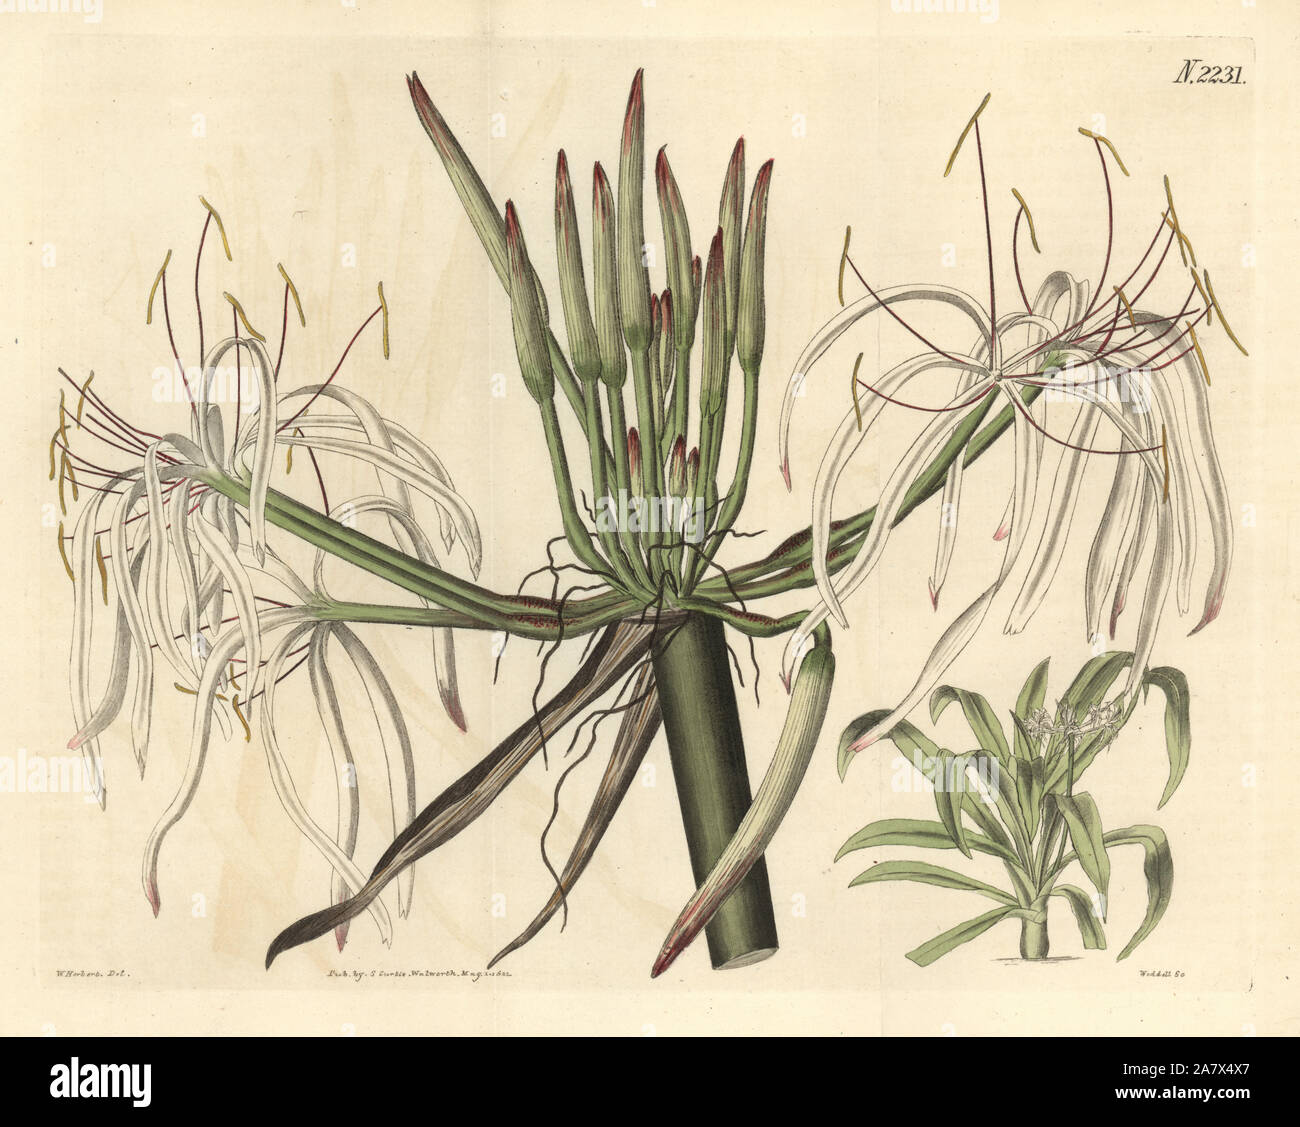 Spider lily, Crinum asiaticum (Sloping flowered crinum, Crinum declinatum). Handcoloured copperplate engraving by Weddell after a drawing by William Herbert for Samuel Curtis' continuation of William Curtis' Botanical Magazine, London, 1822. Stock Photo